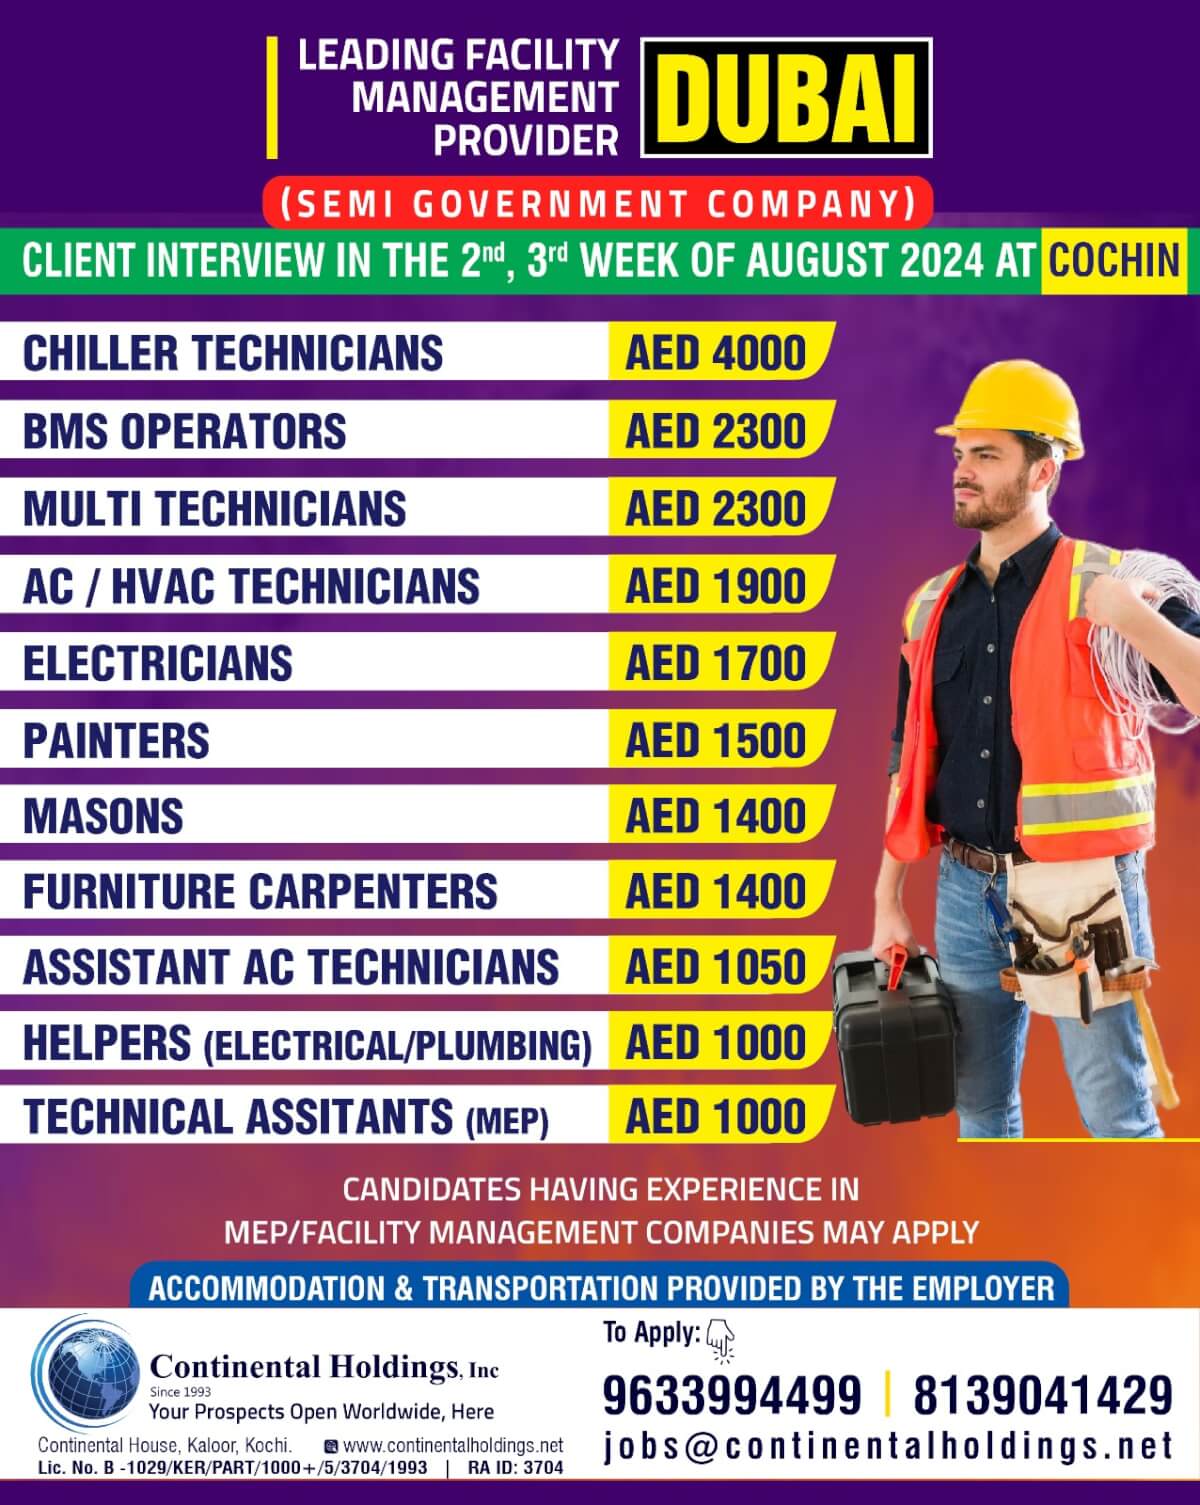 Hiring for a Semi Gov Facility Management Company in UAE - Direct Client Interview at Cochin